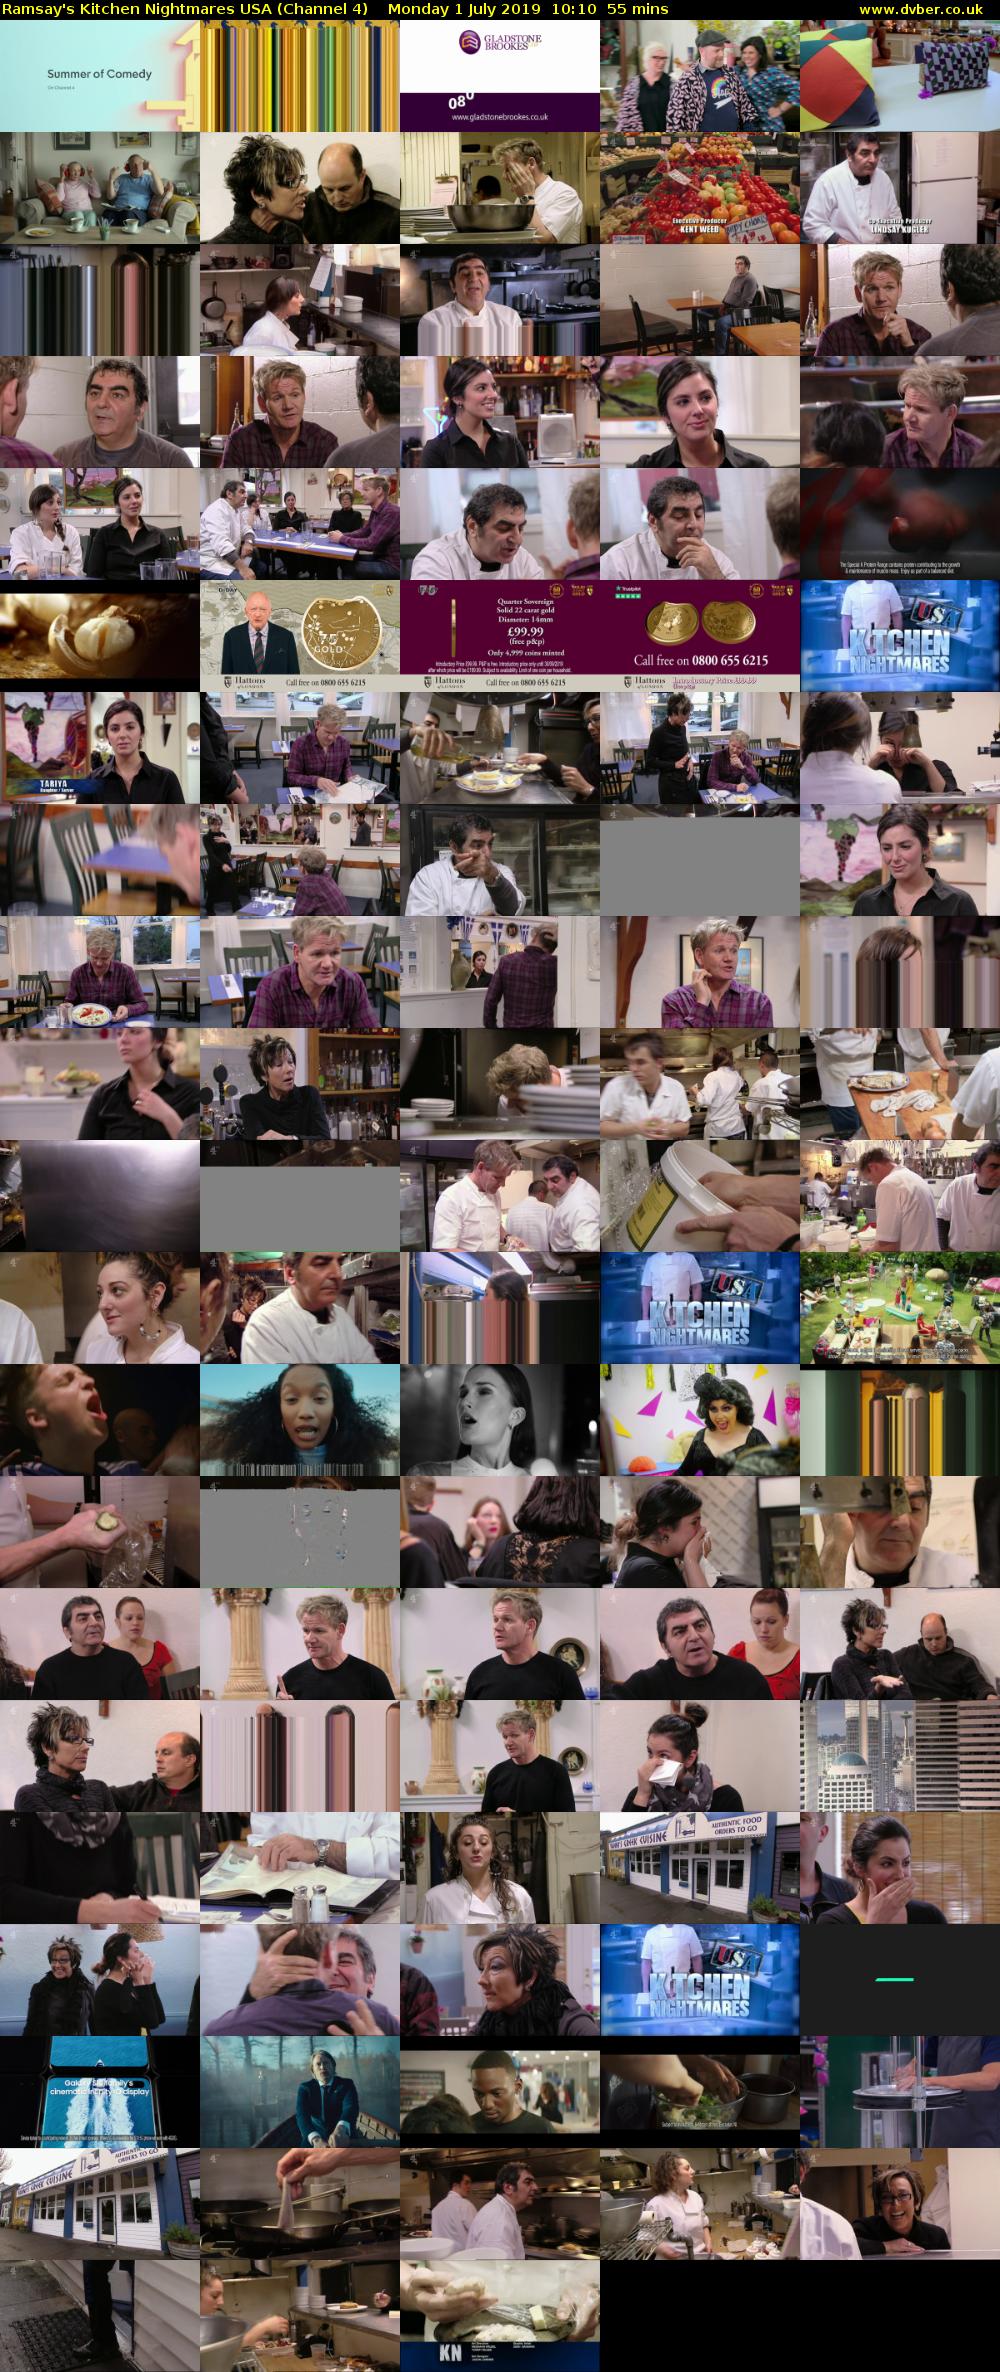 Ramsay's Kitchen Nightmares USA (Channel 4) Monday 1 July 2019 10:10 - 11:05